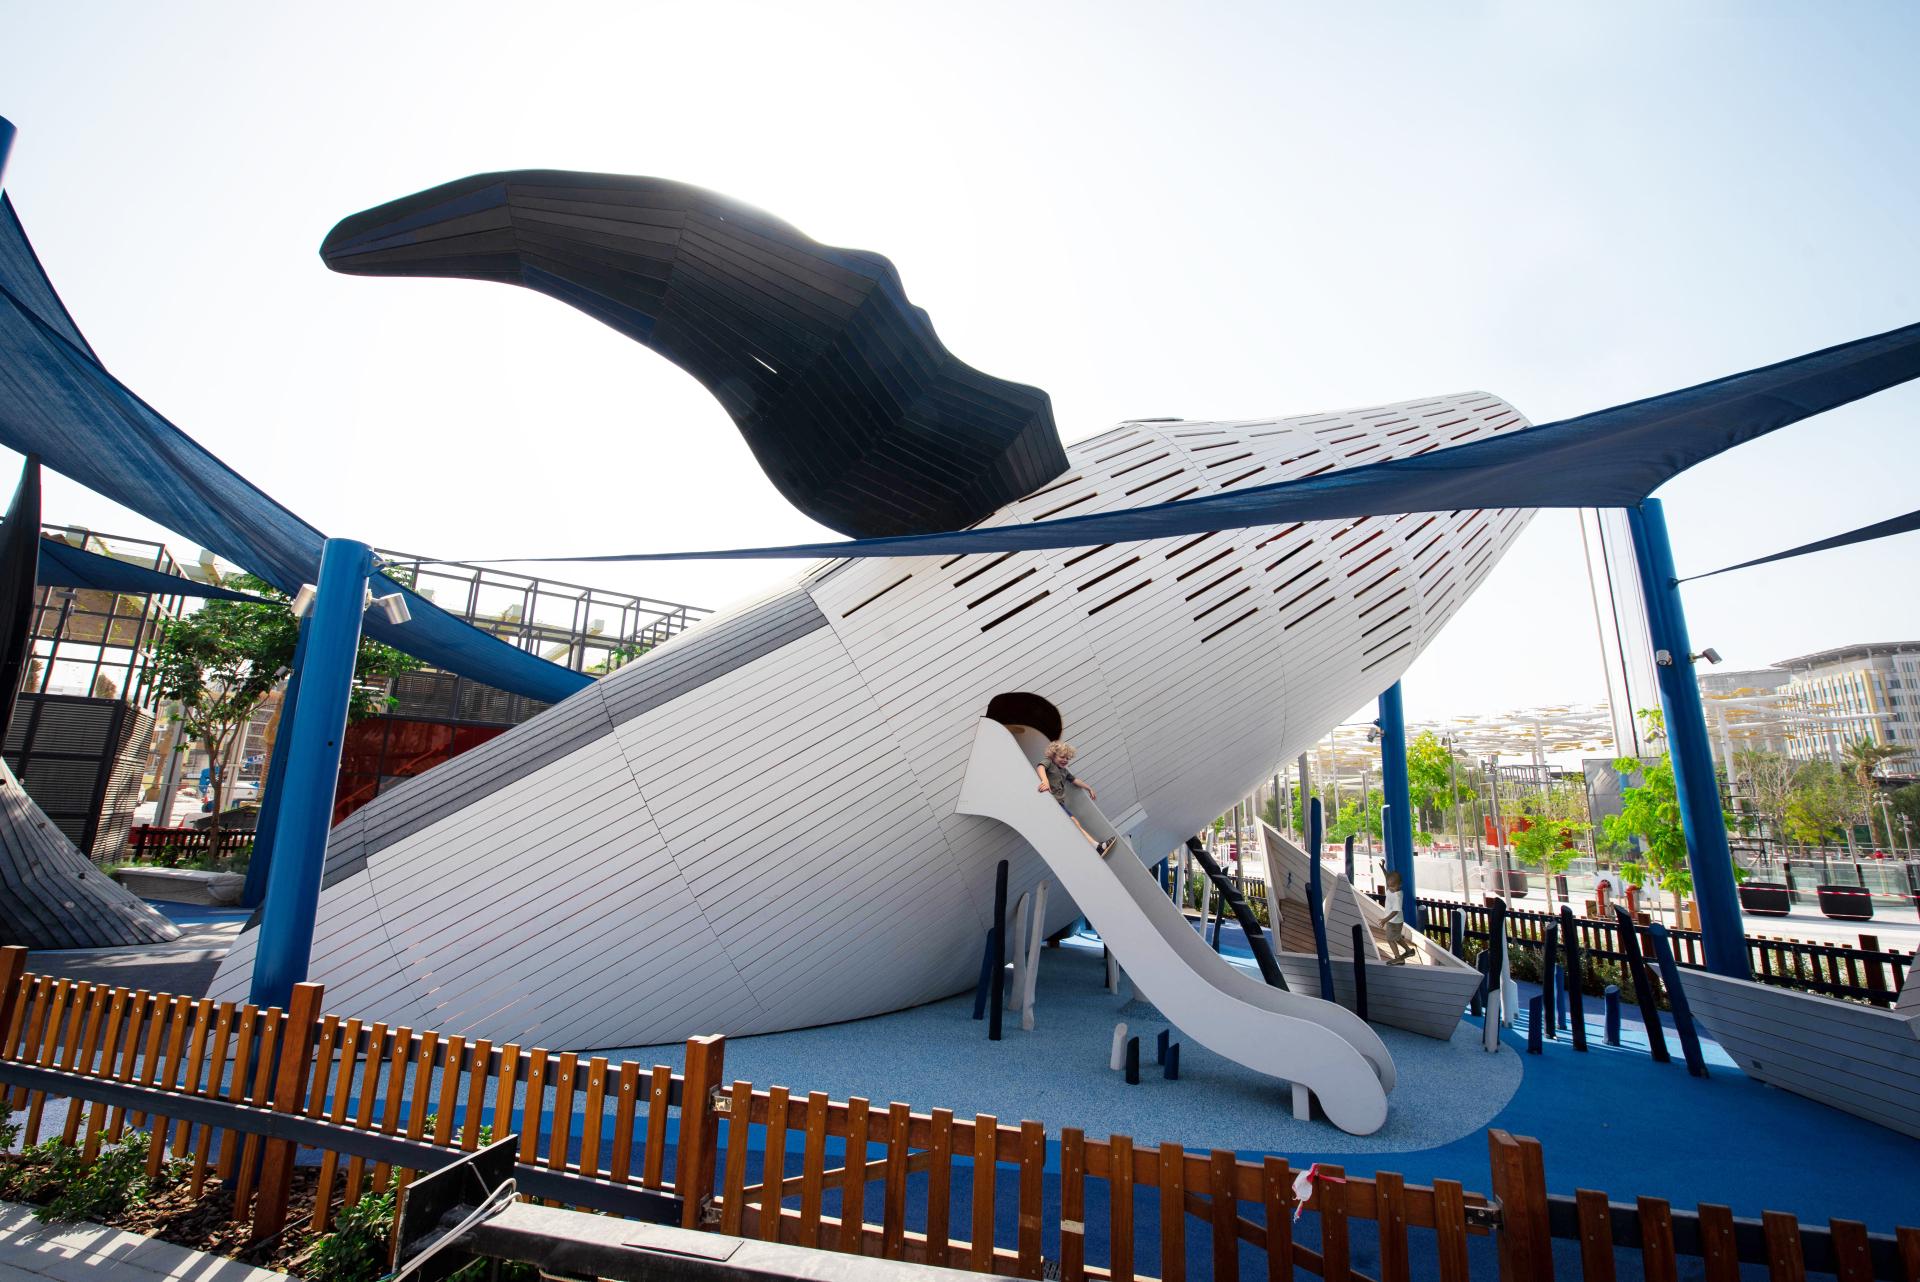 MONSTRUM humpback whale at EXPO 2020